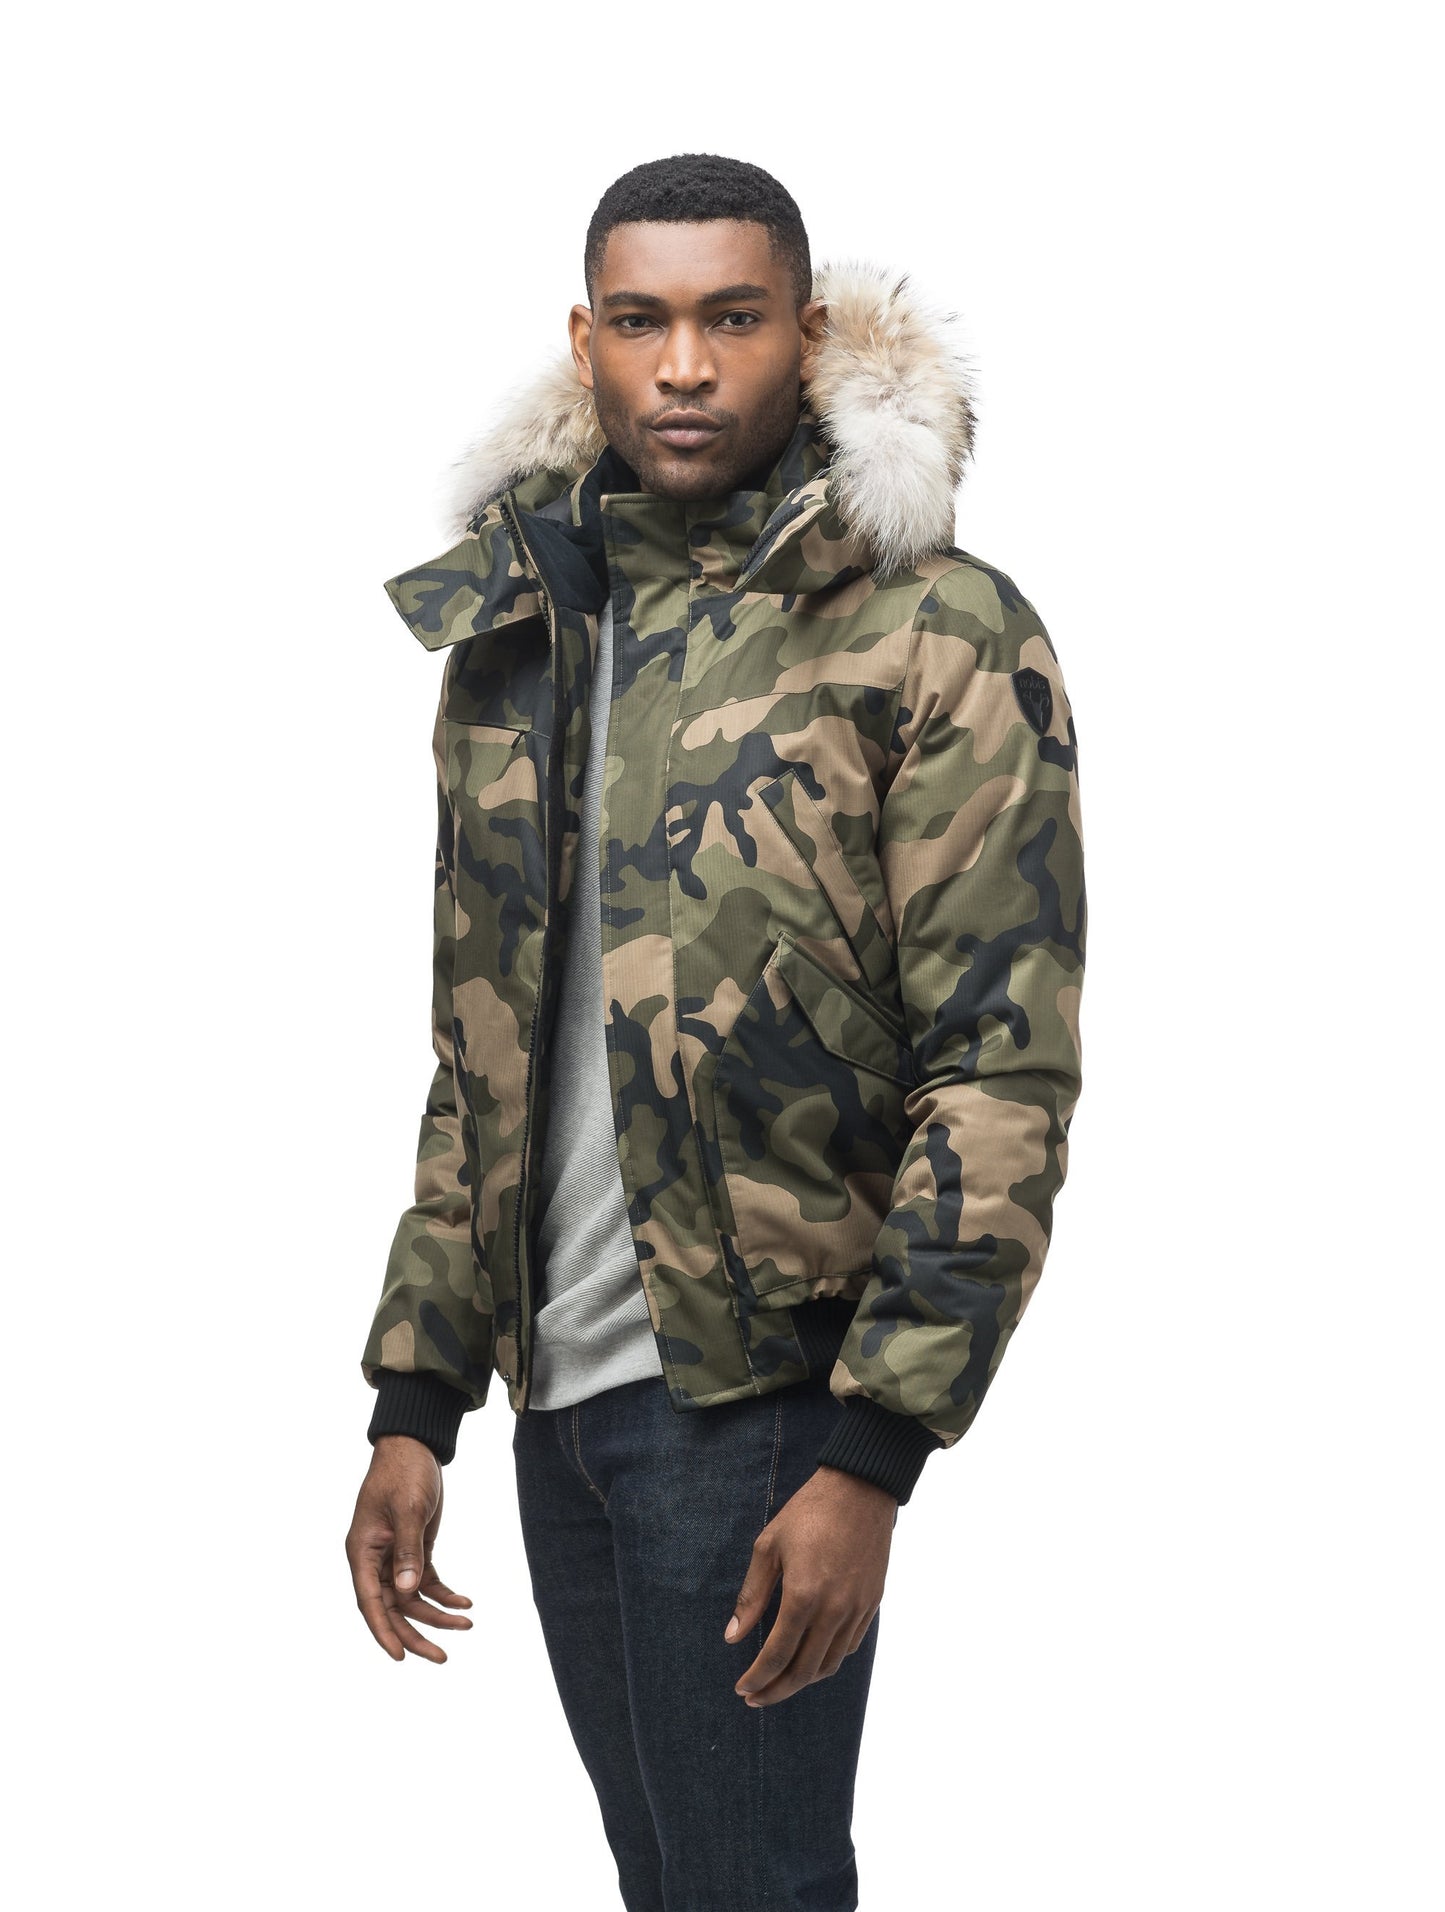 Men's classic down filled bomber jacket with a down filledÃƒâ€šÃ‚Â hood that features a removable coyote fur trim and concealed moldable framing wire in Camo